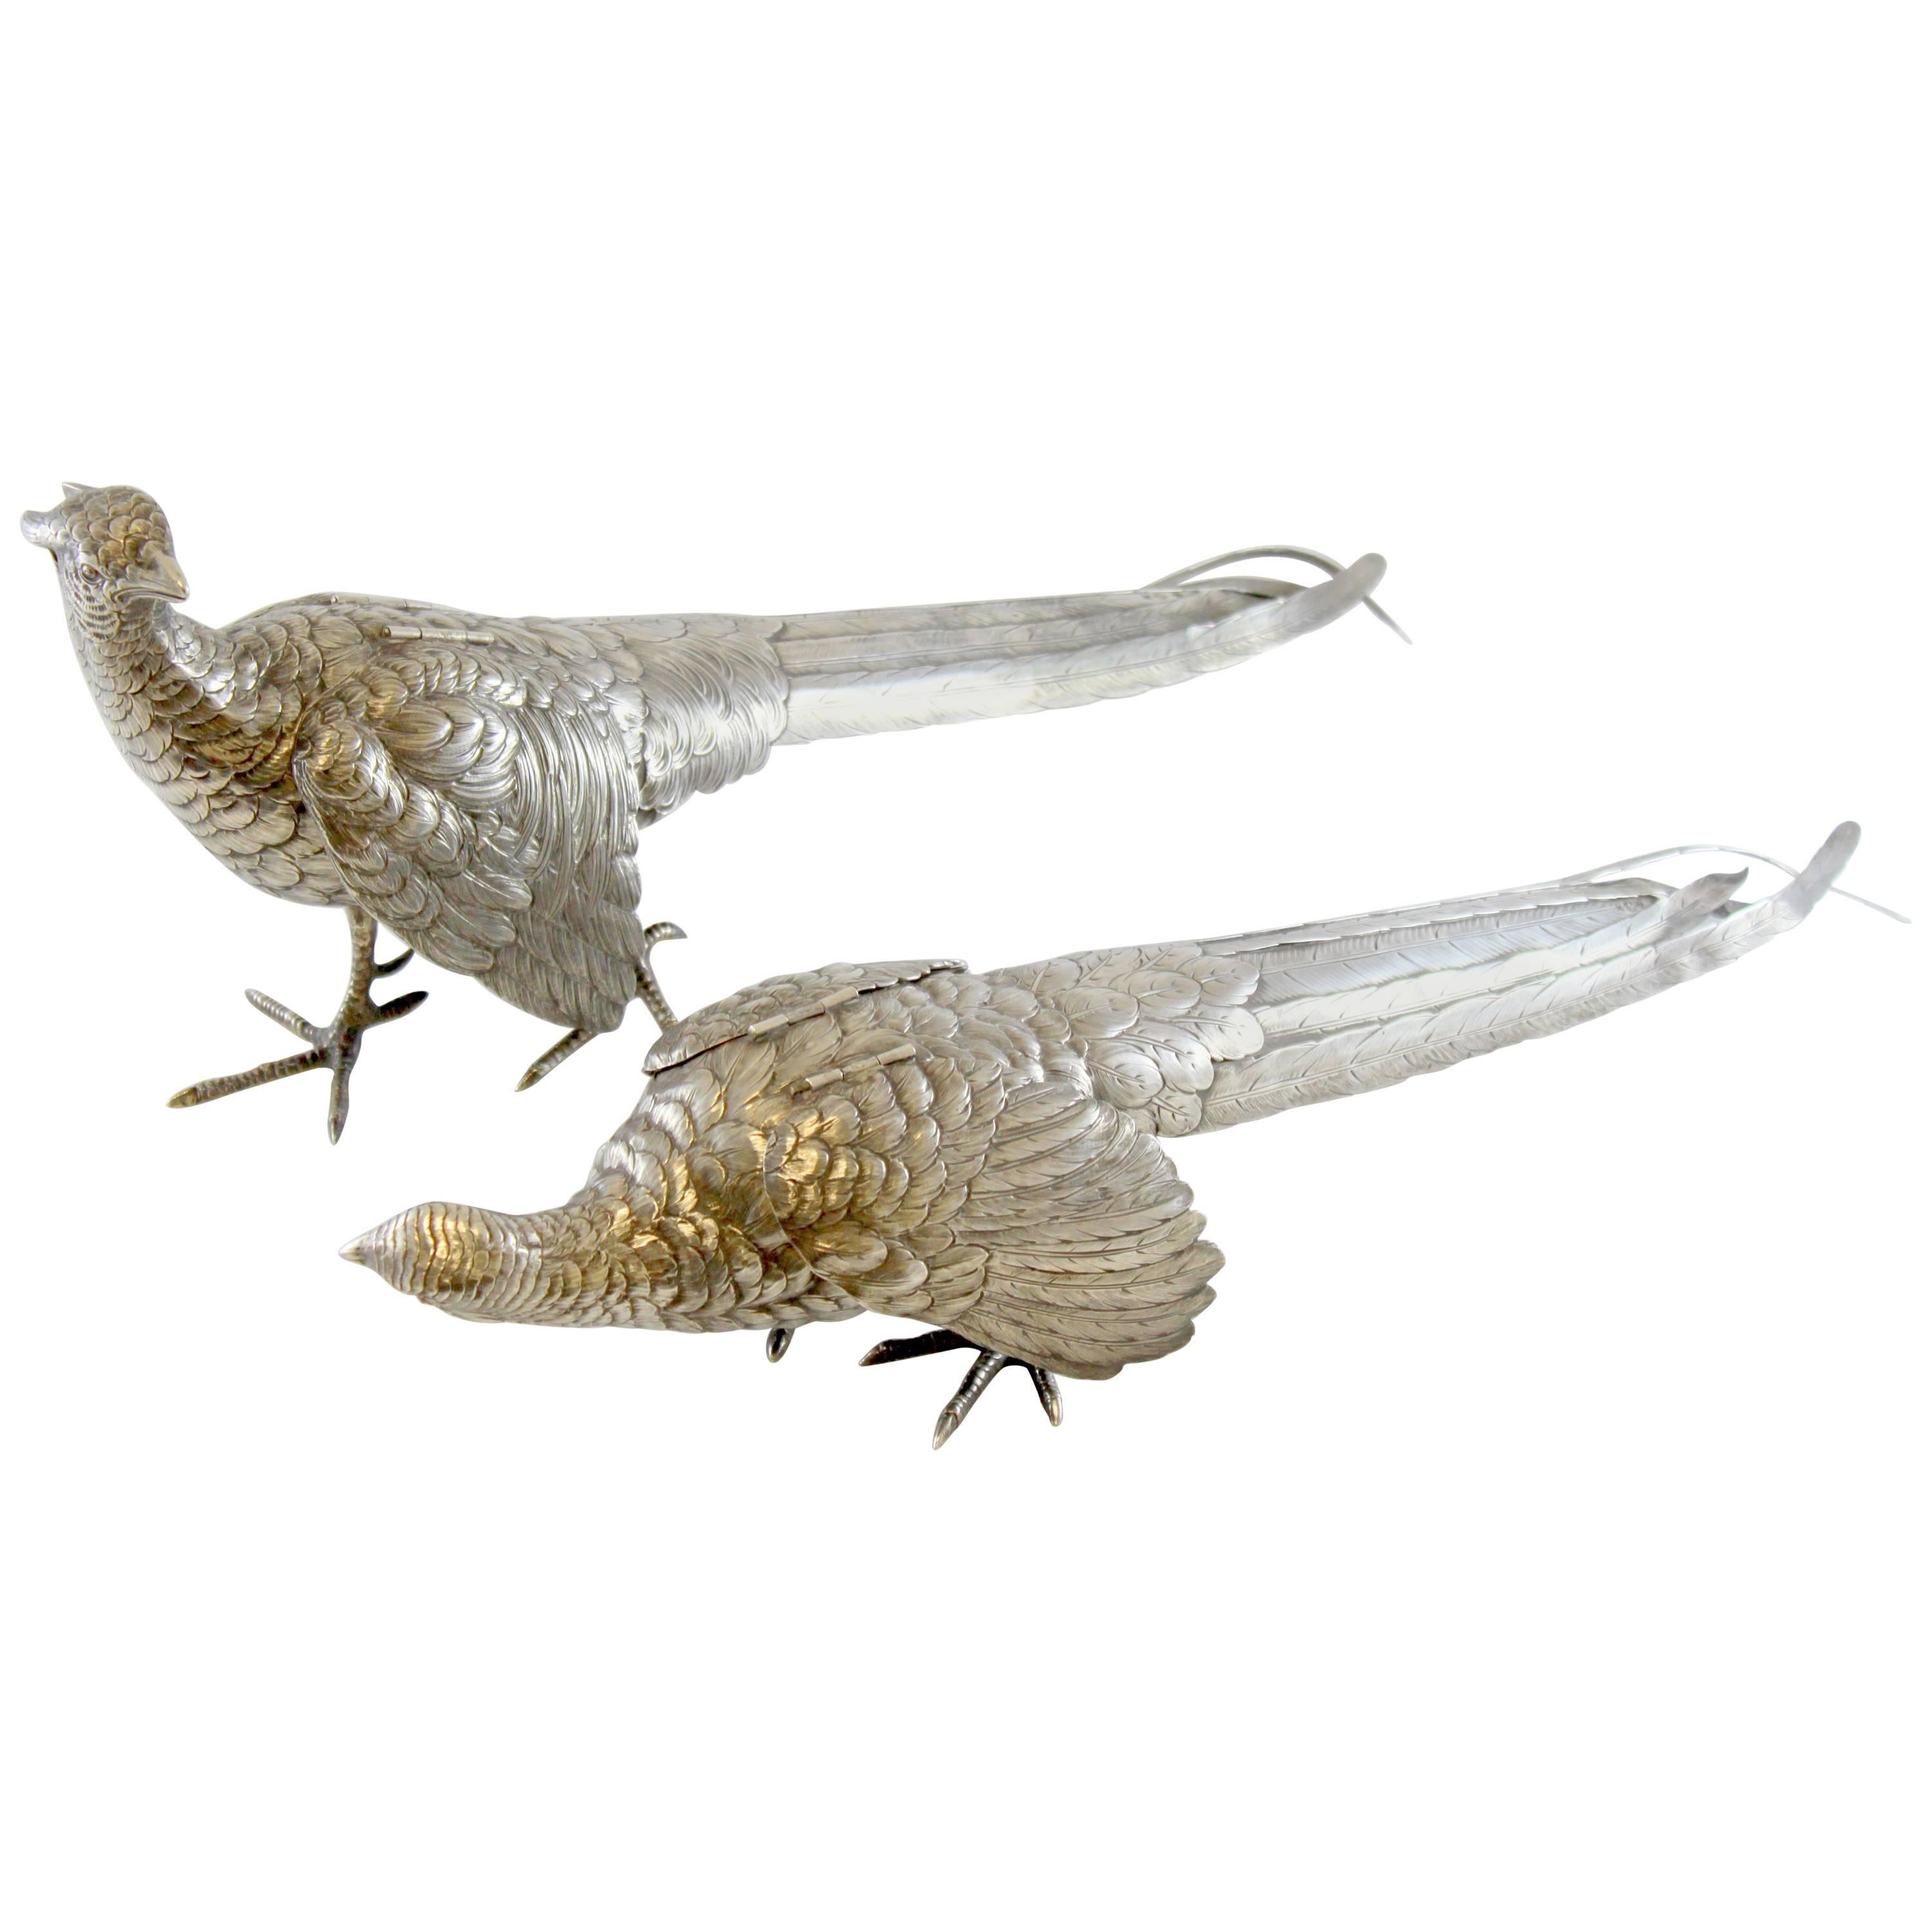 Antique Pair of Silver Large Bird Figurines, Possibly Spanish, 20th Century